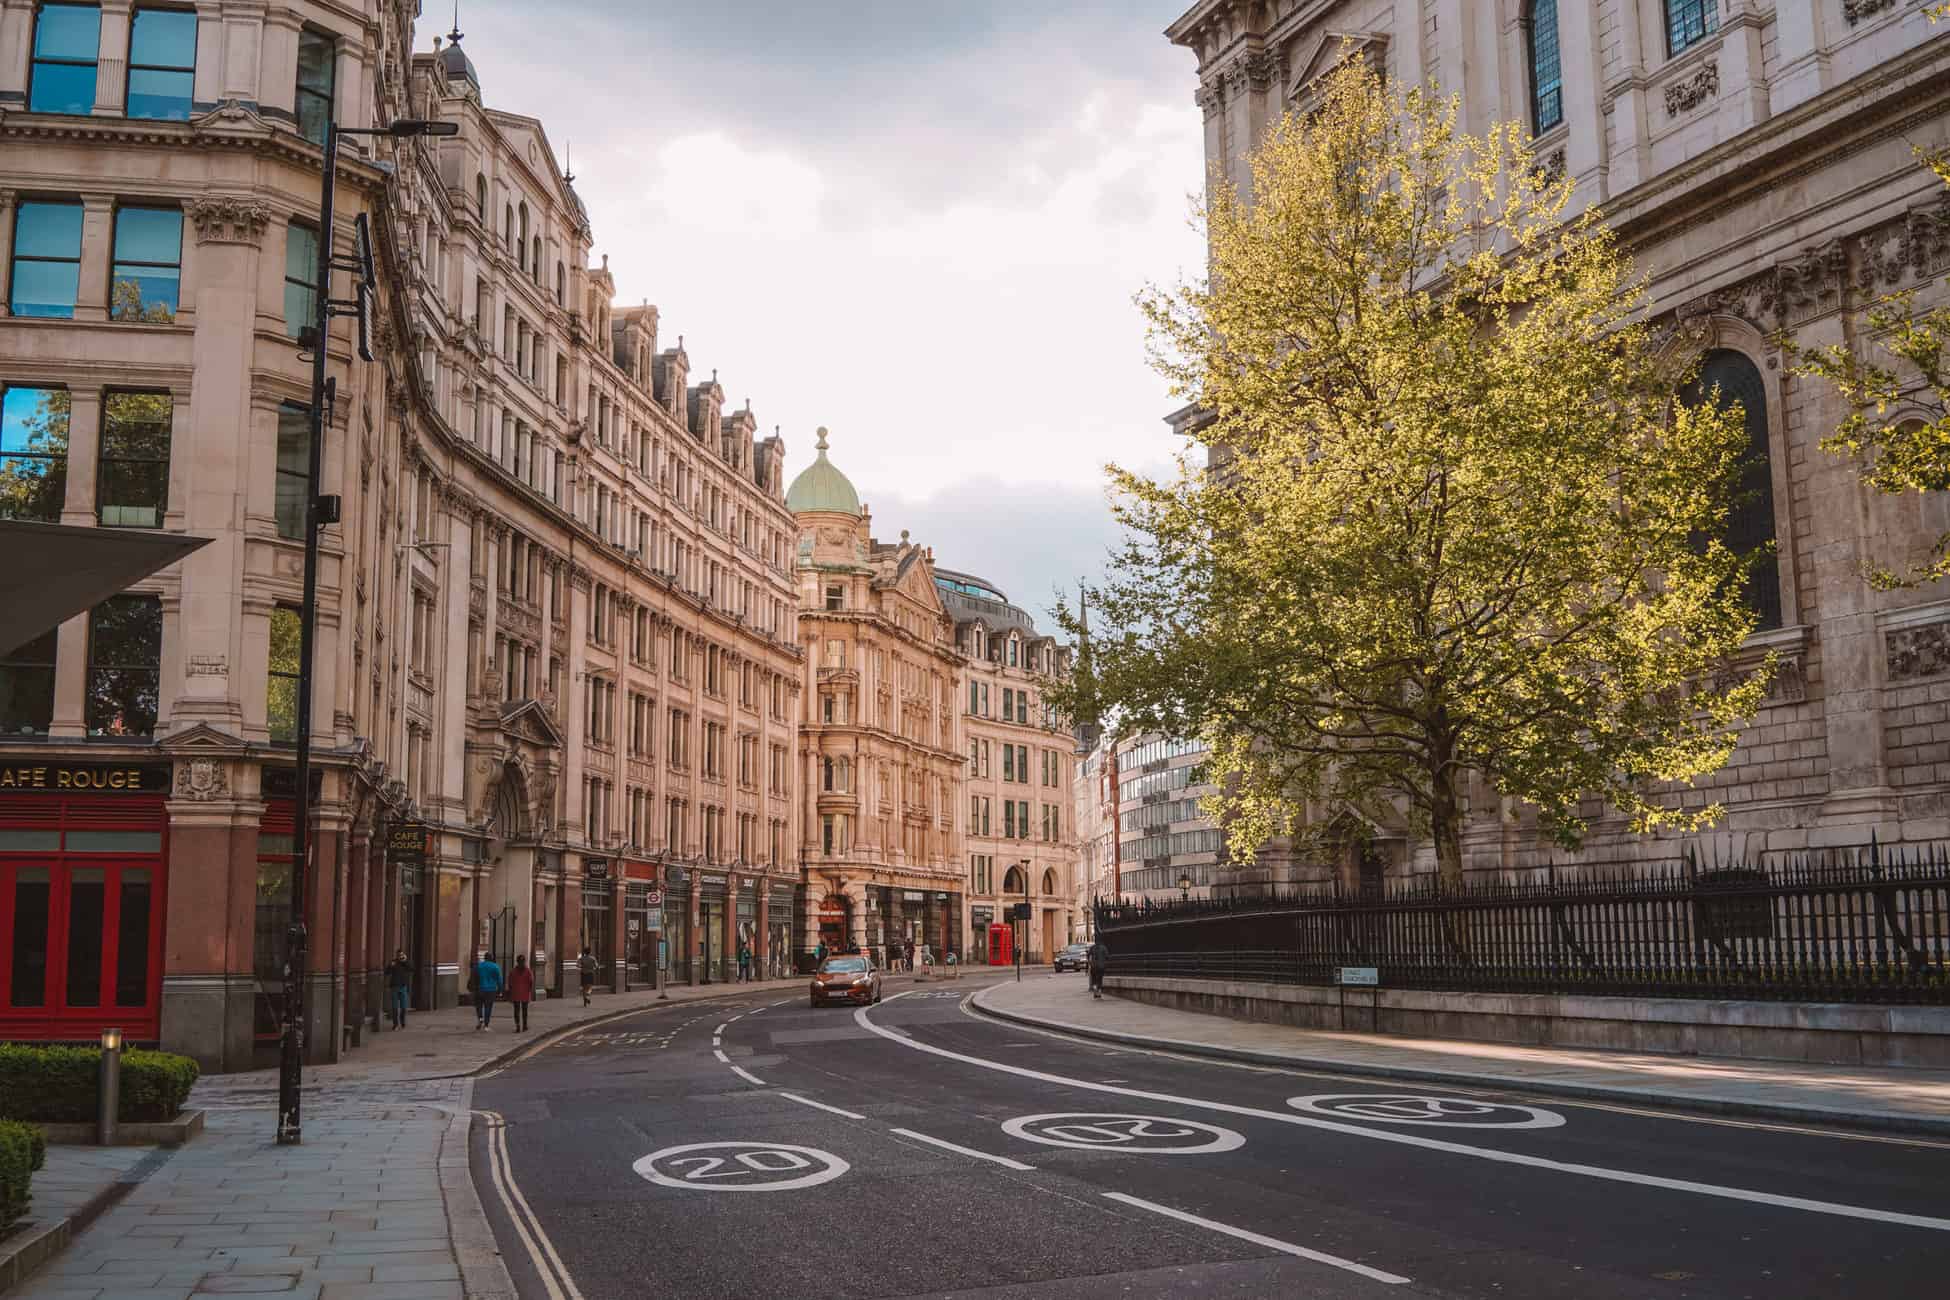 Is it worth to live in London? Pros and cons of living in London